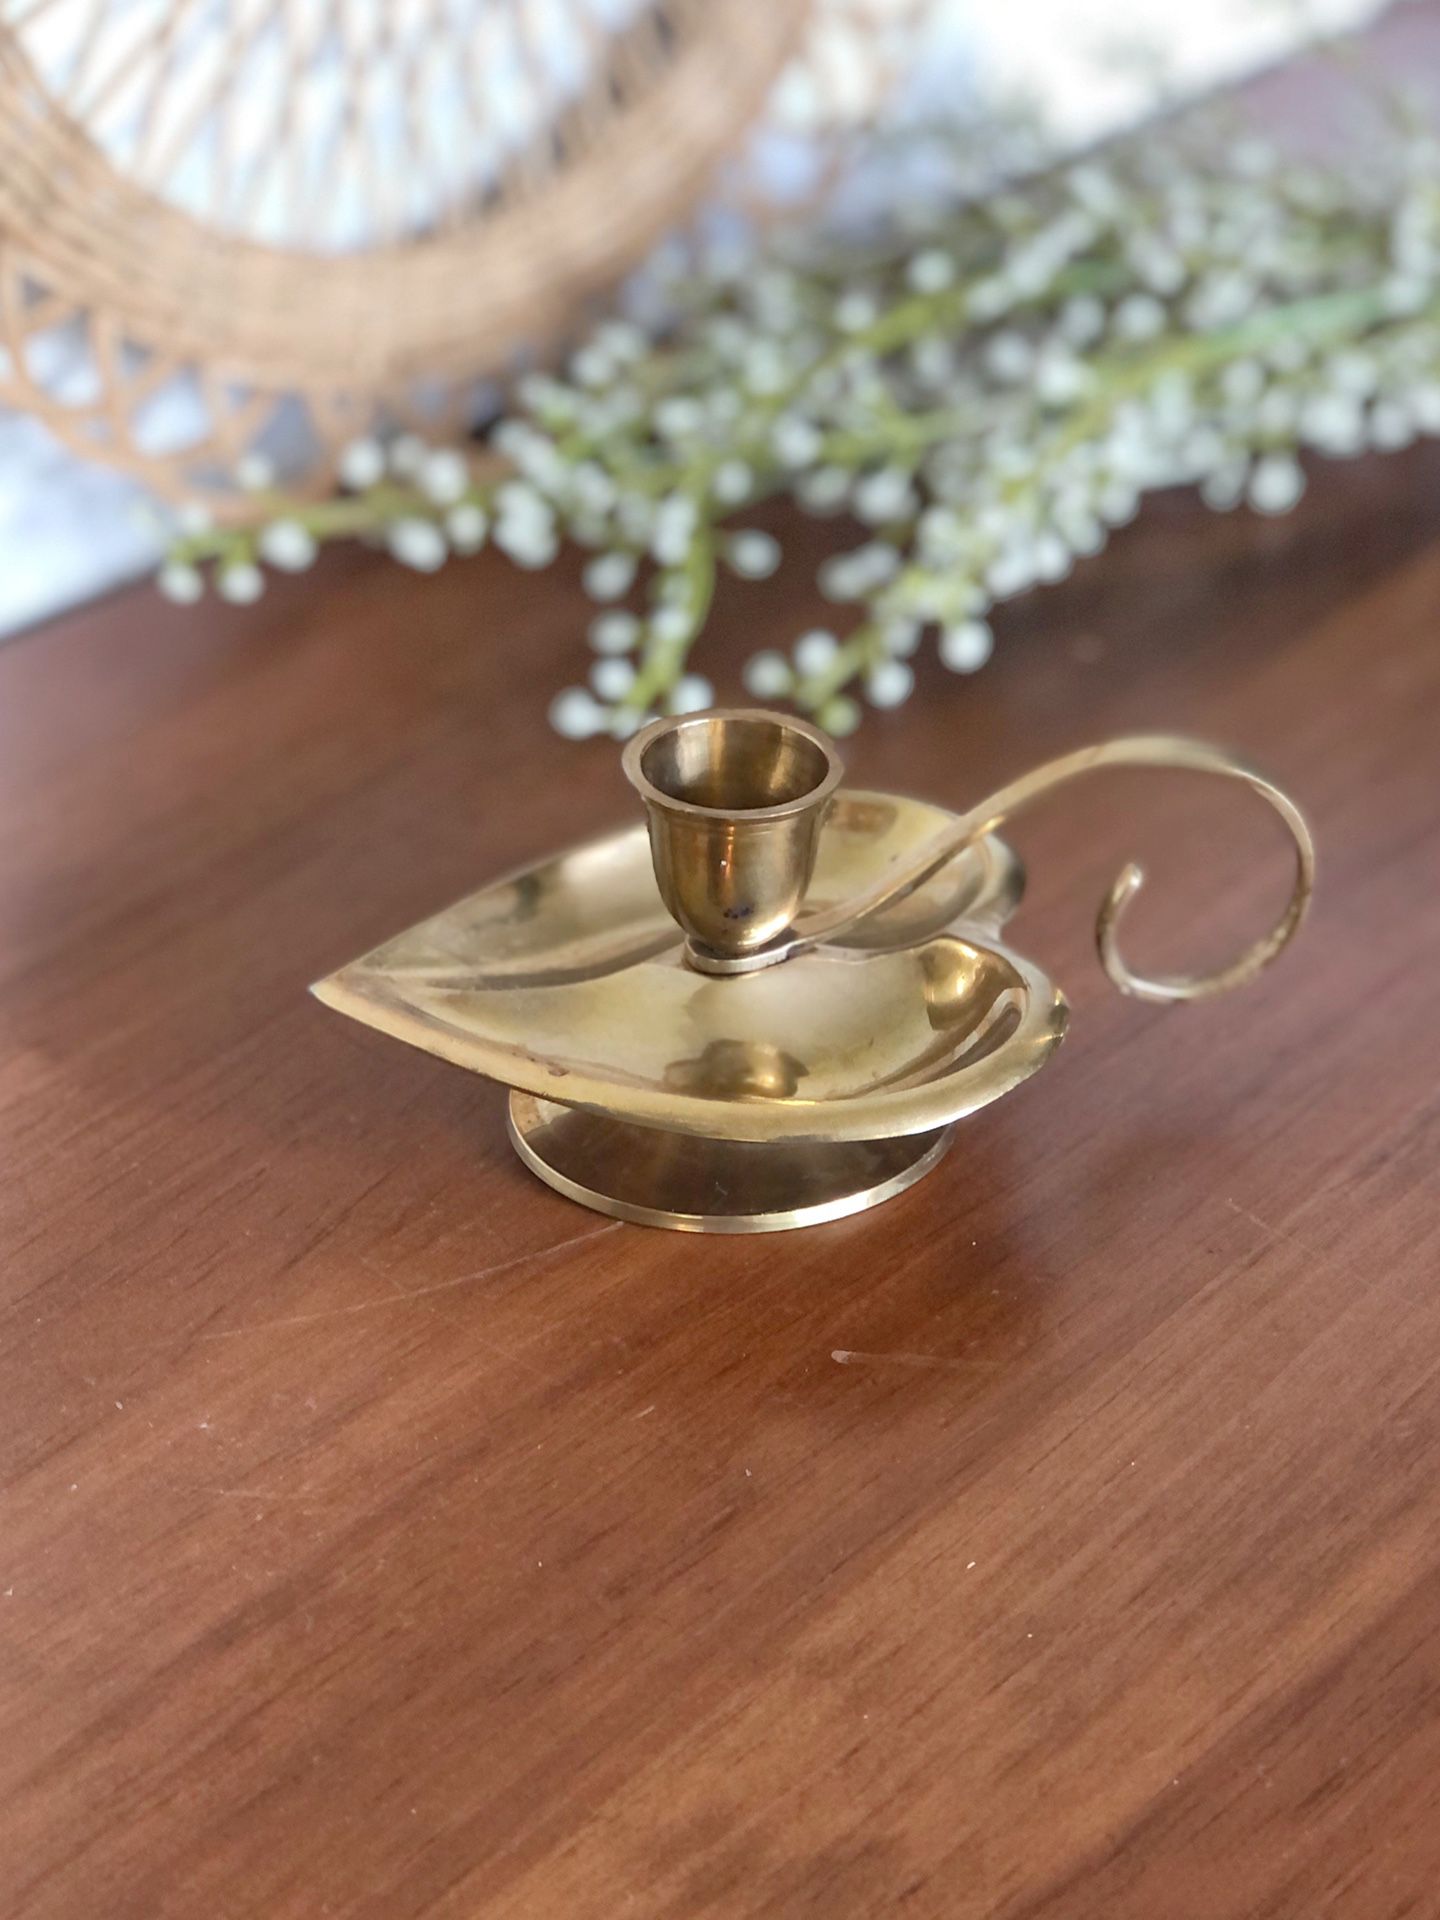 Vintage brass heart candle holder with handle / 5.5”x3.5” (including handle)